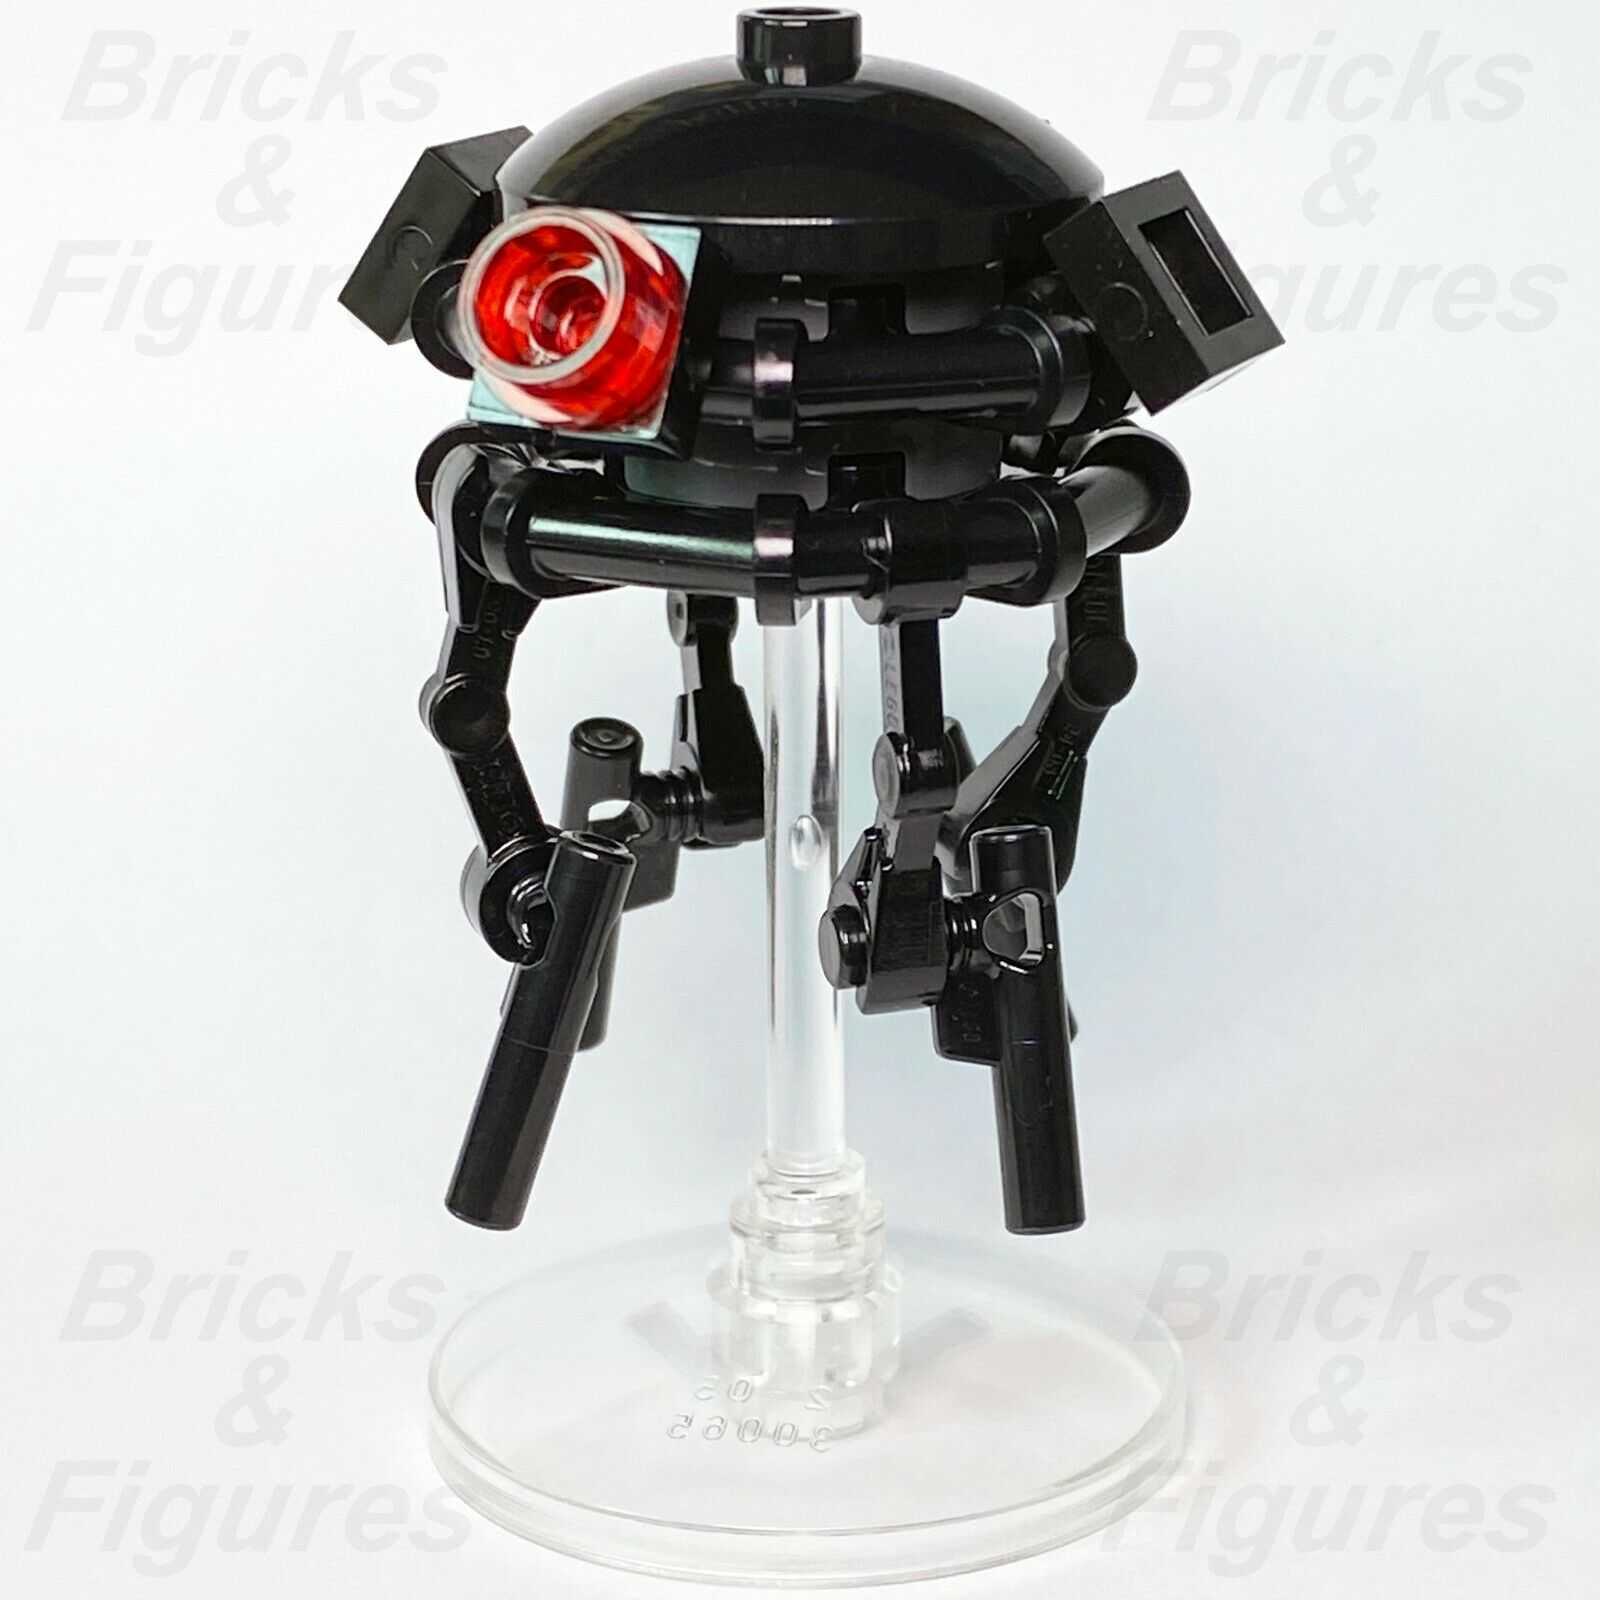 New Star Wars LEGO Imperial Probe Droid with Stand Minifigure 75185 911838 - Bricks & Figures